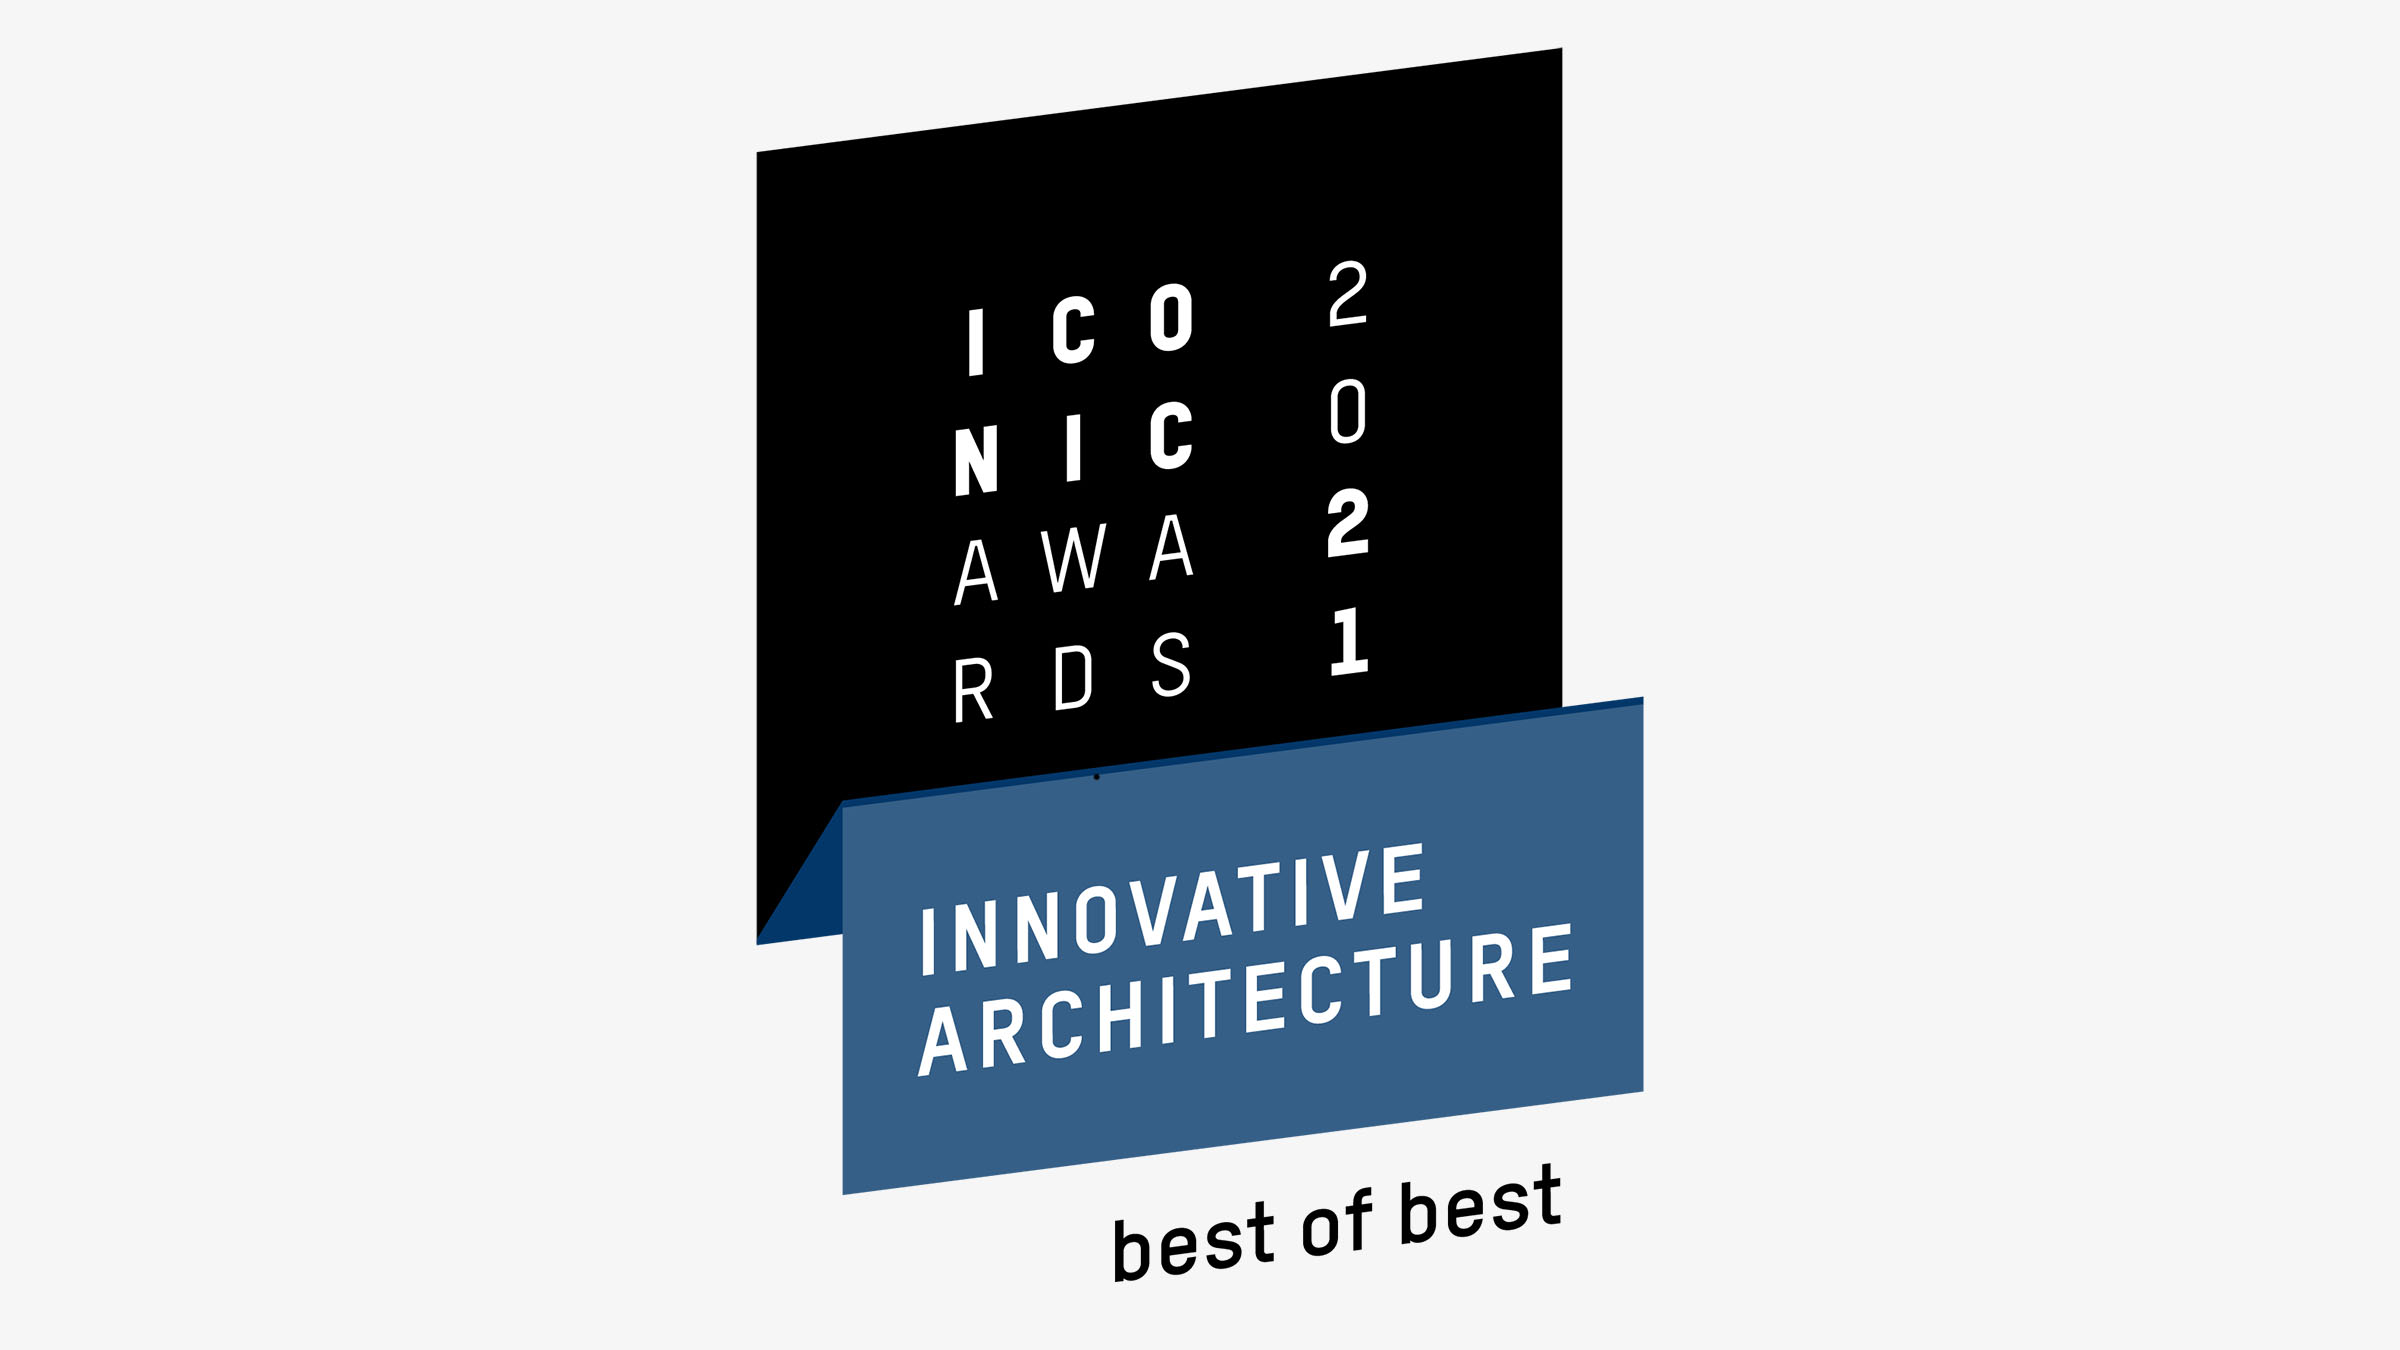 Iconic Awards 2021 Innovative Architecture best of best